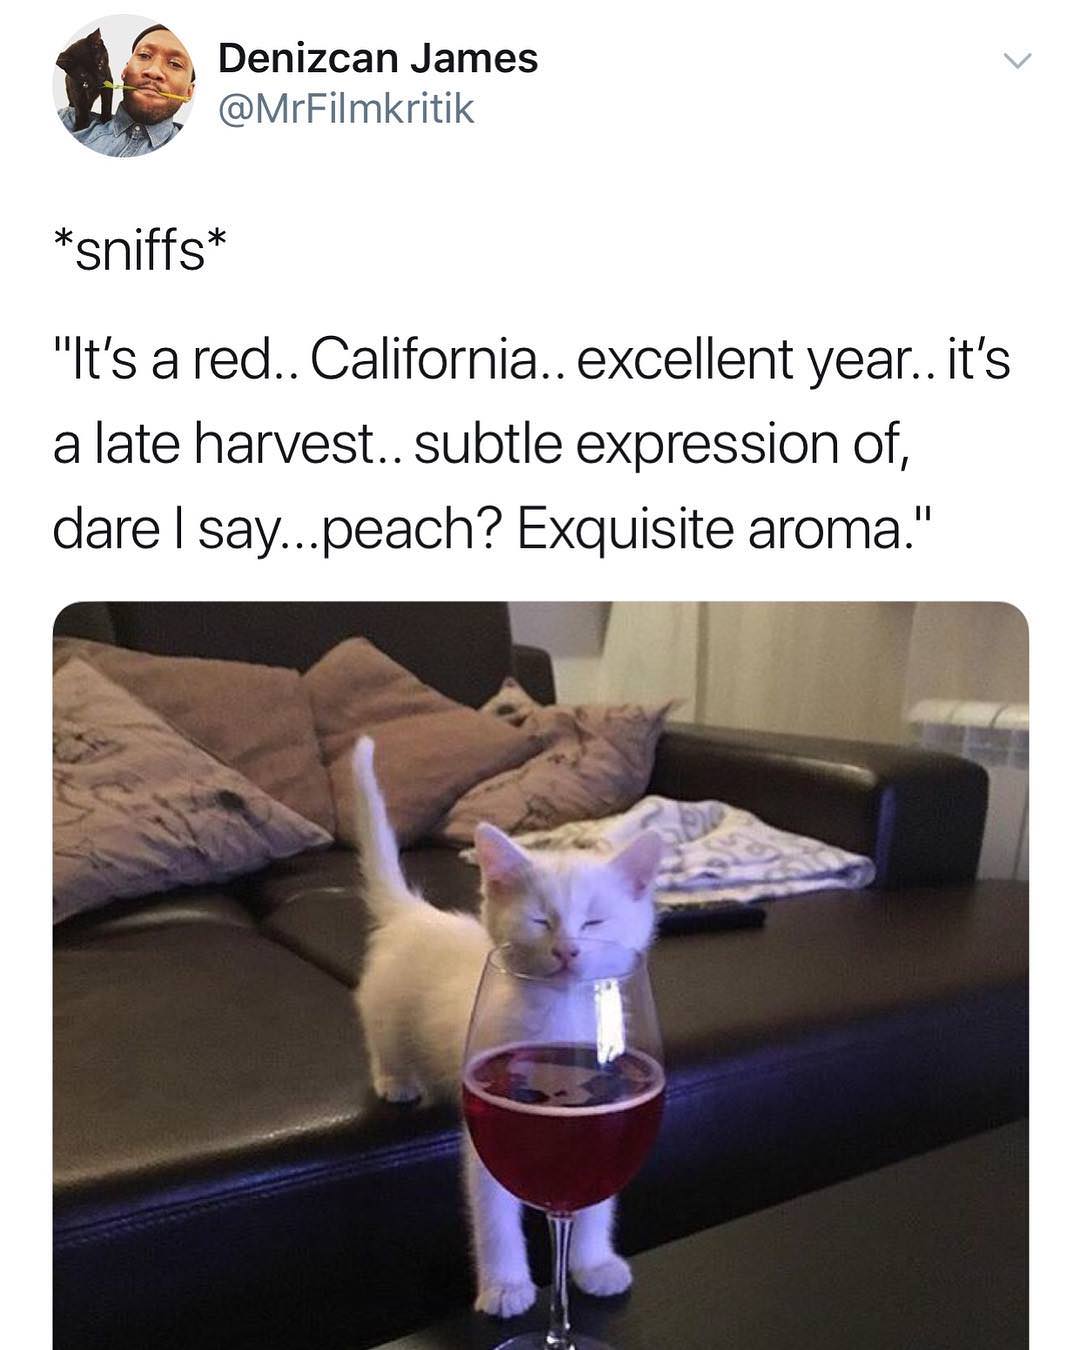 cat wine meme - Denizcan James sniffs "It's a red.. California.. excellent year.. it's a late harvest.. subtle expression of, dare I say...peach? Exquisite aroma."